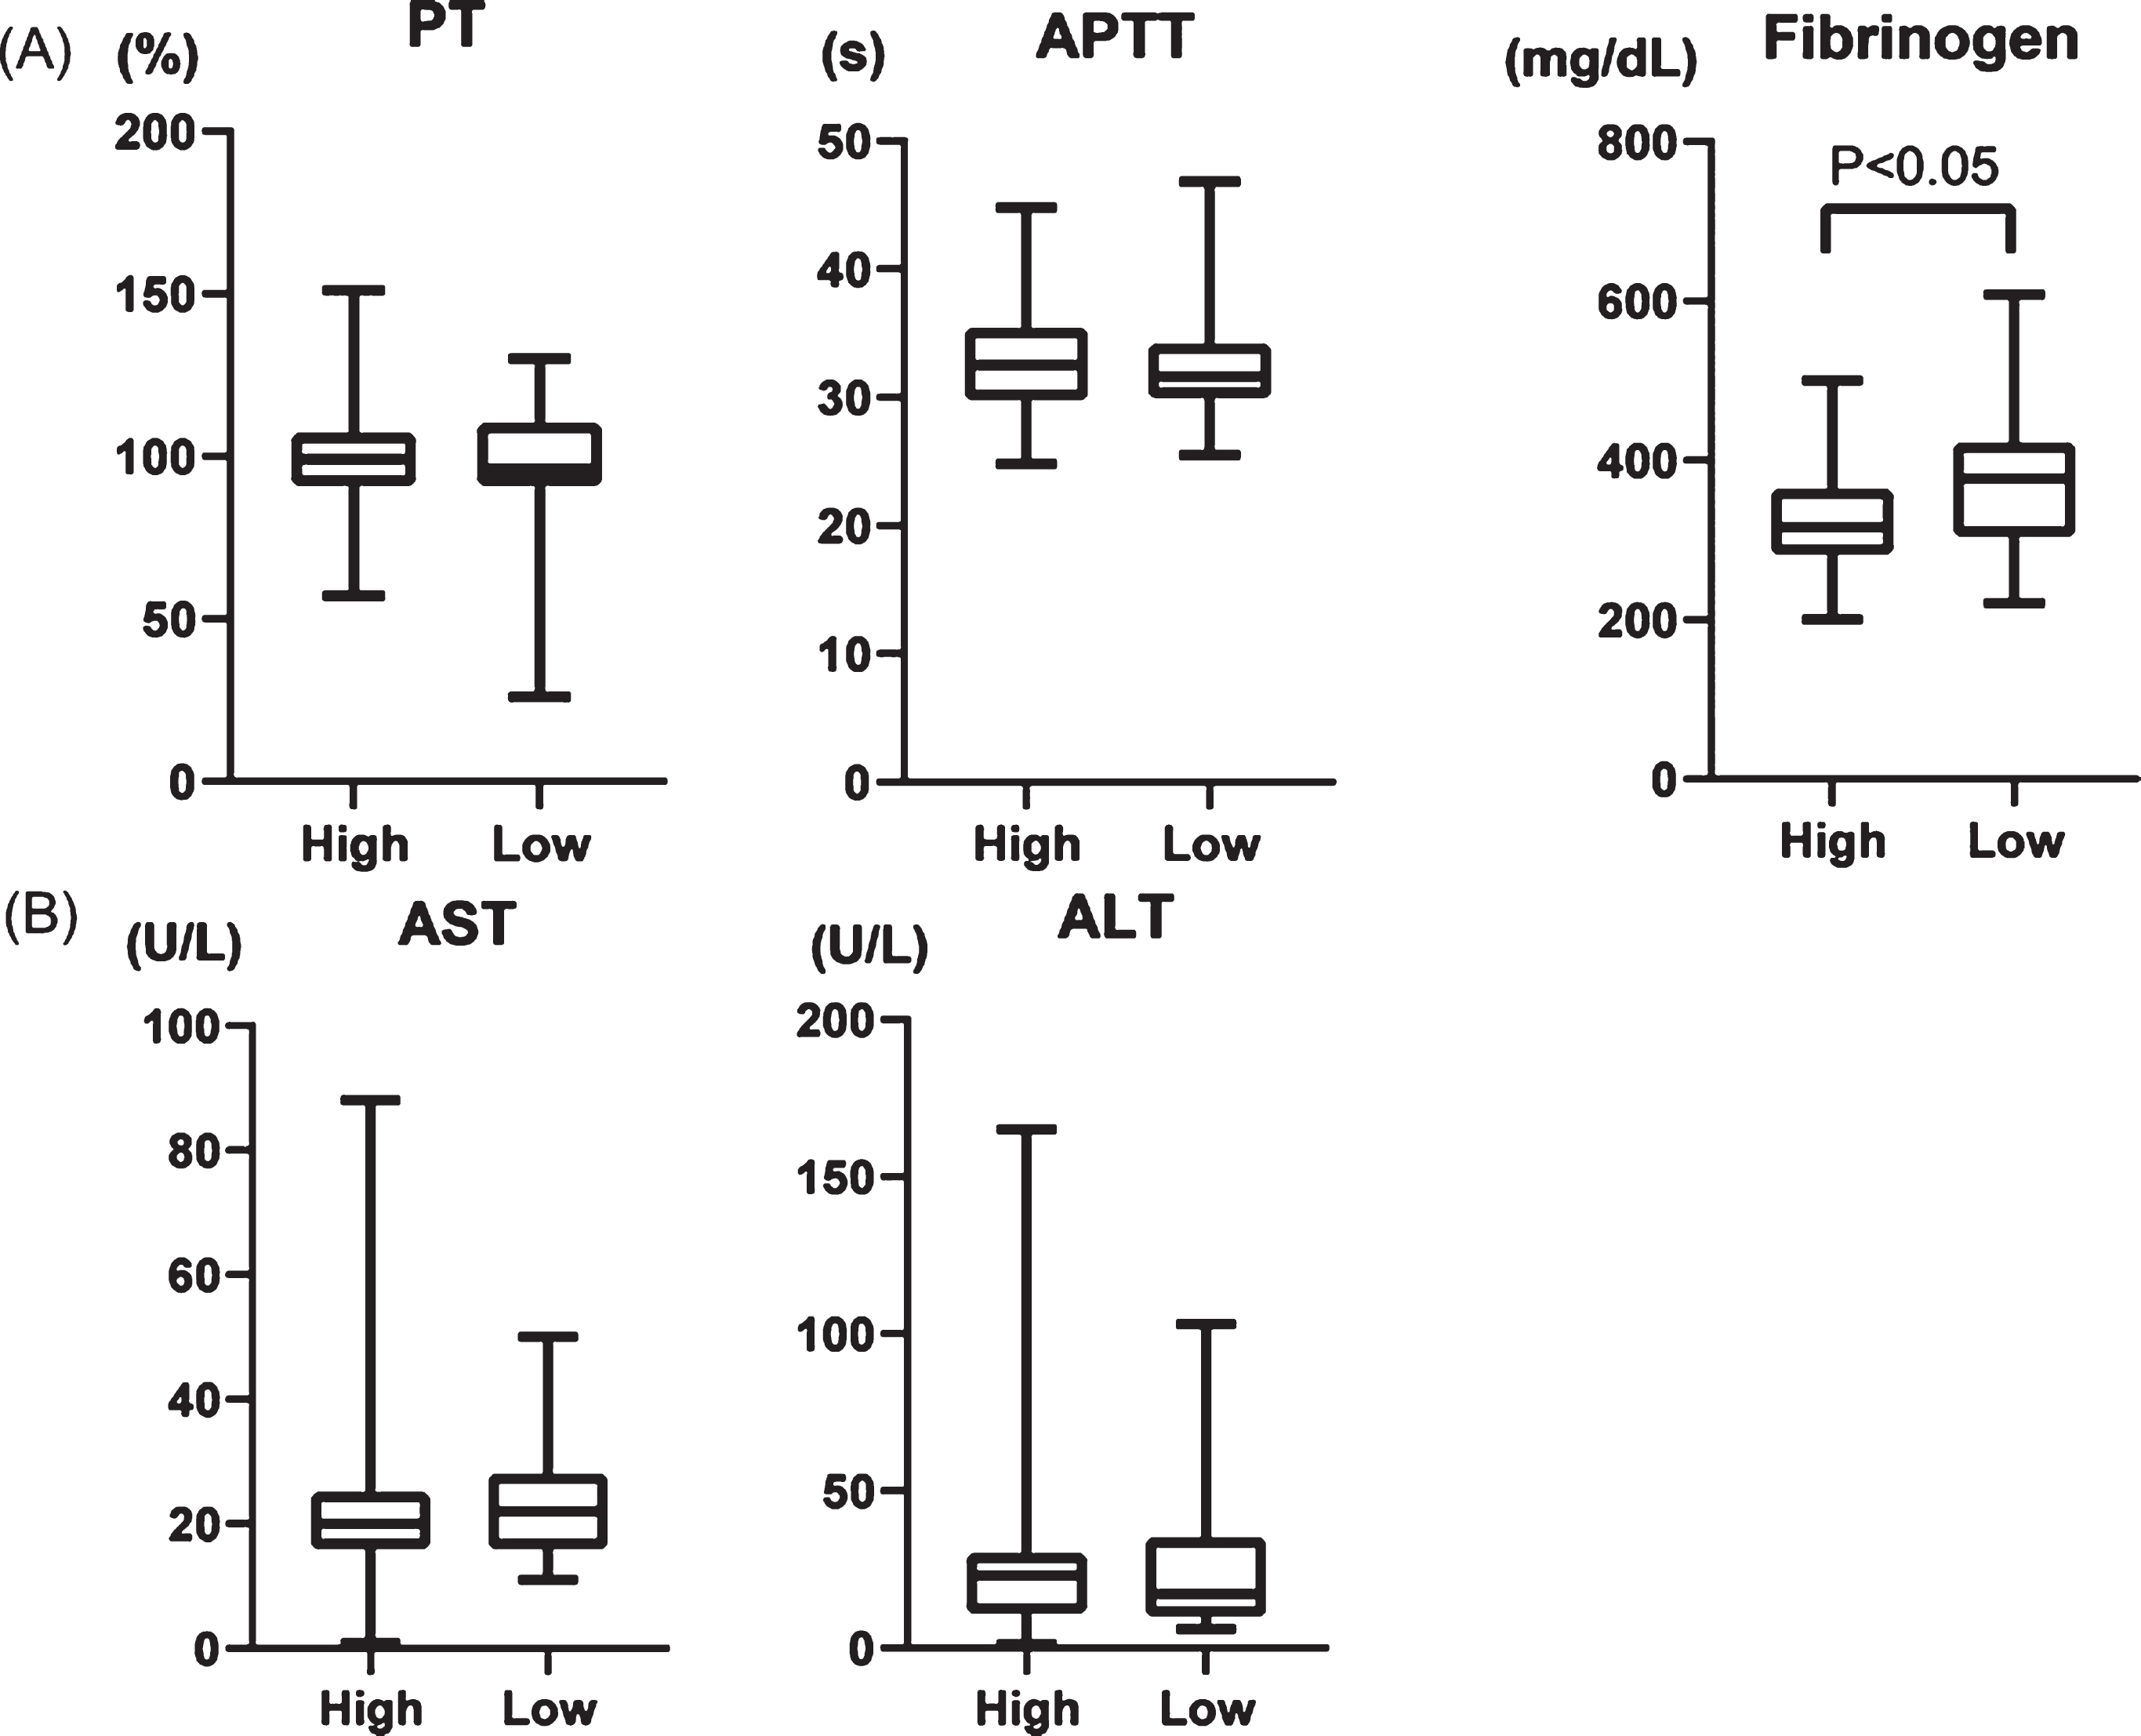 (A) Comparison of prothrombin time (PT), activated partial thromboplastin time (APTT), fibrinogen, (B) AST, and ALT in two groups; high PCT increasing rate (High) and low PCT increasing rate (low).